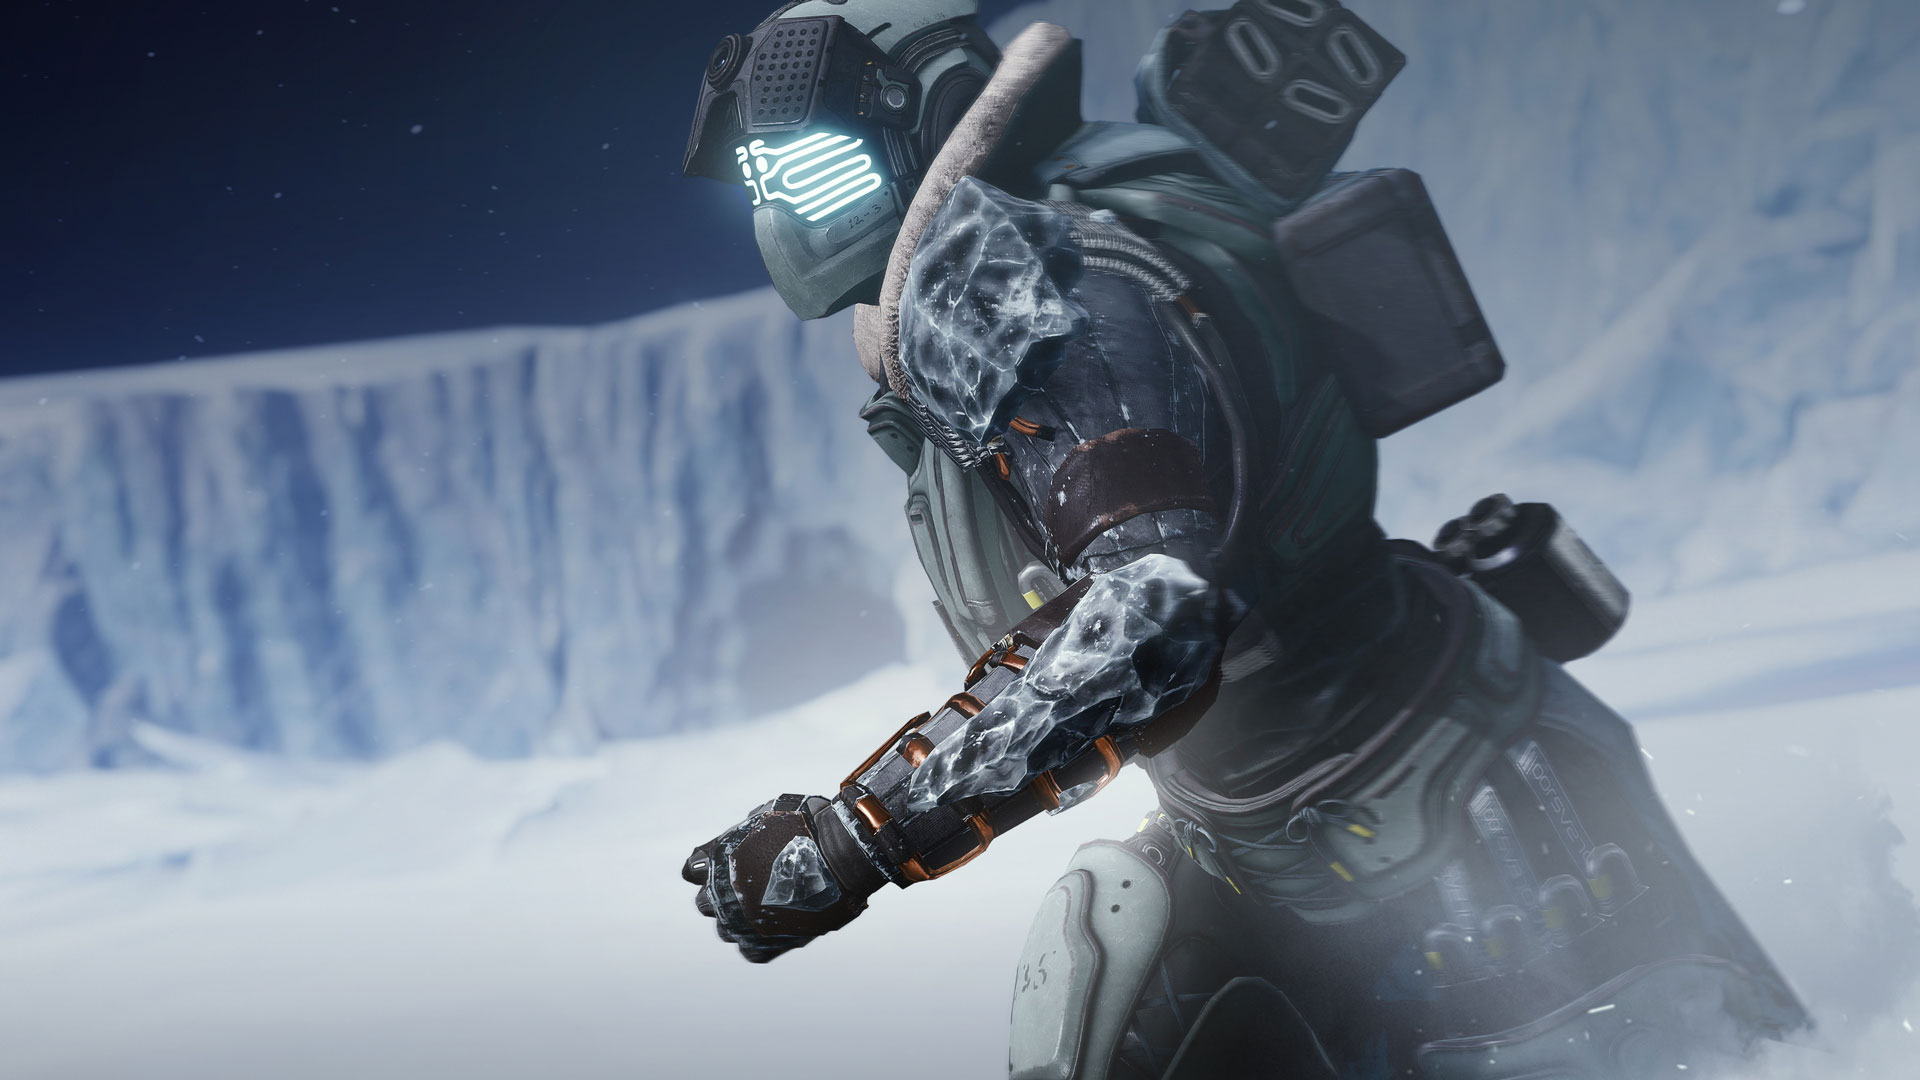 Destiny 2 Beyond Light Exotic armor: A Warlock running through a winter environment with the Icefall Mantle.